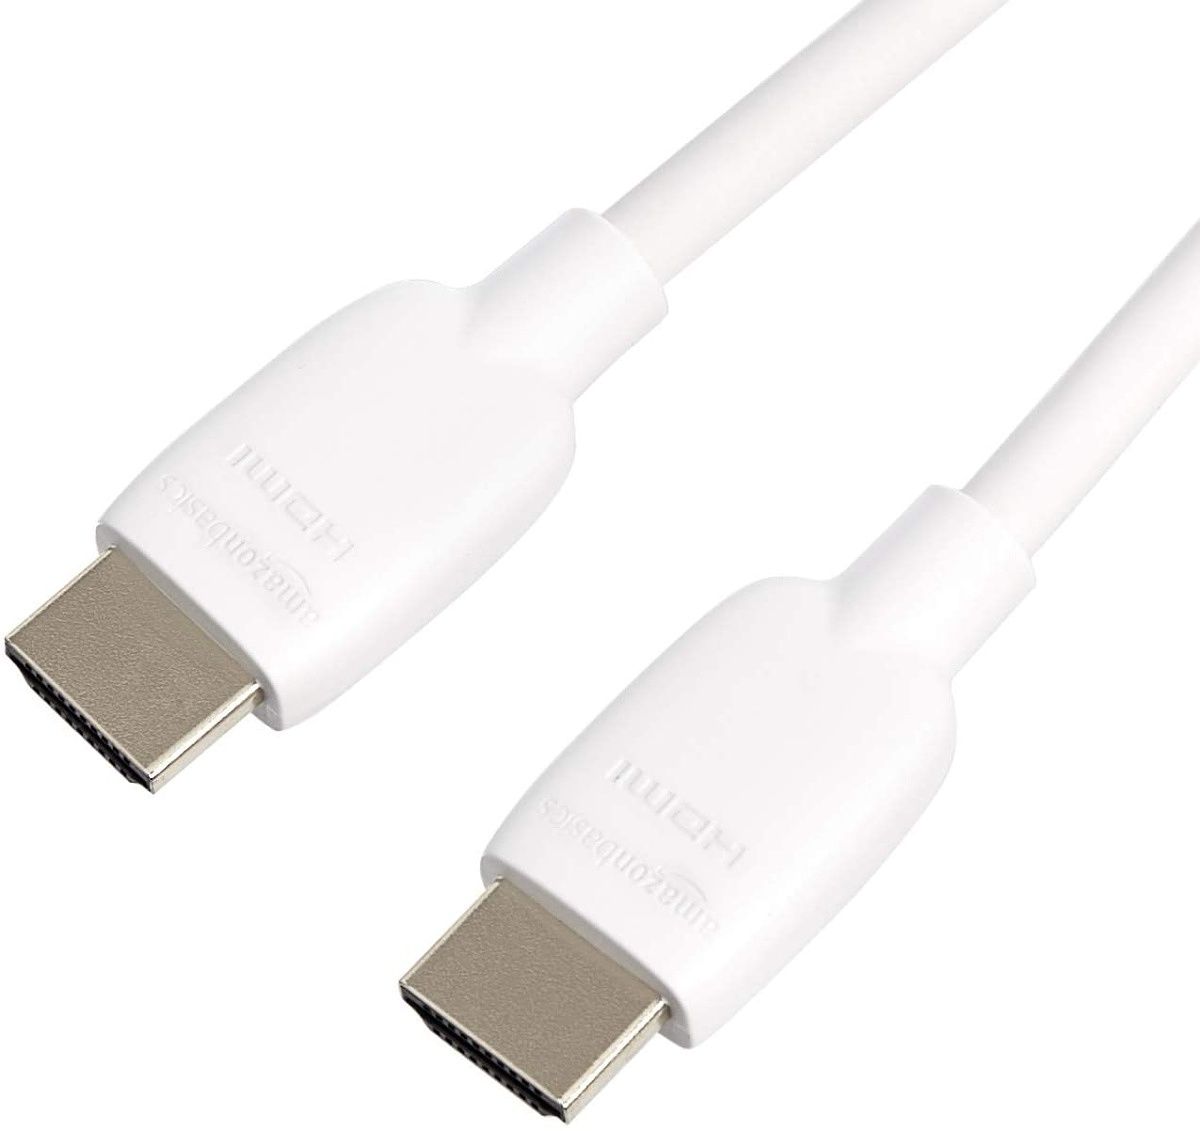 AmazonBasics stuff is often hit-or-miss, but this HDMI 2.1 cable from the Amazon brand is quite good. You can buy it in three, six, and 10 feet sizes and get three color options.